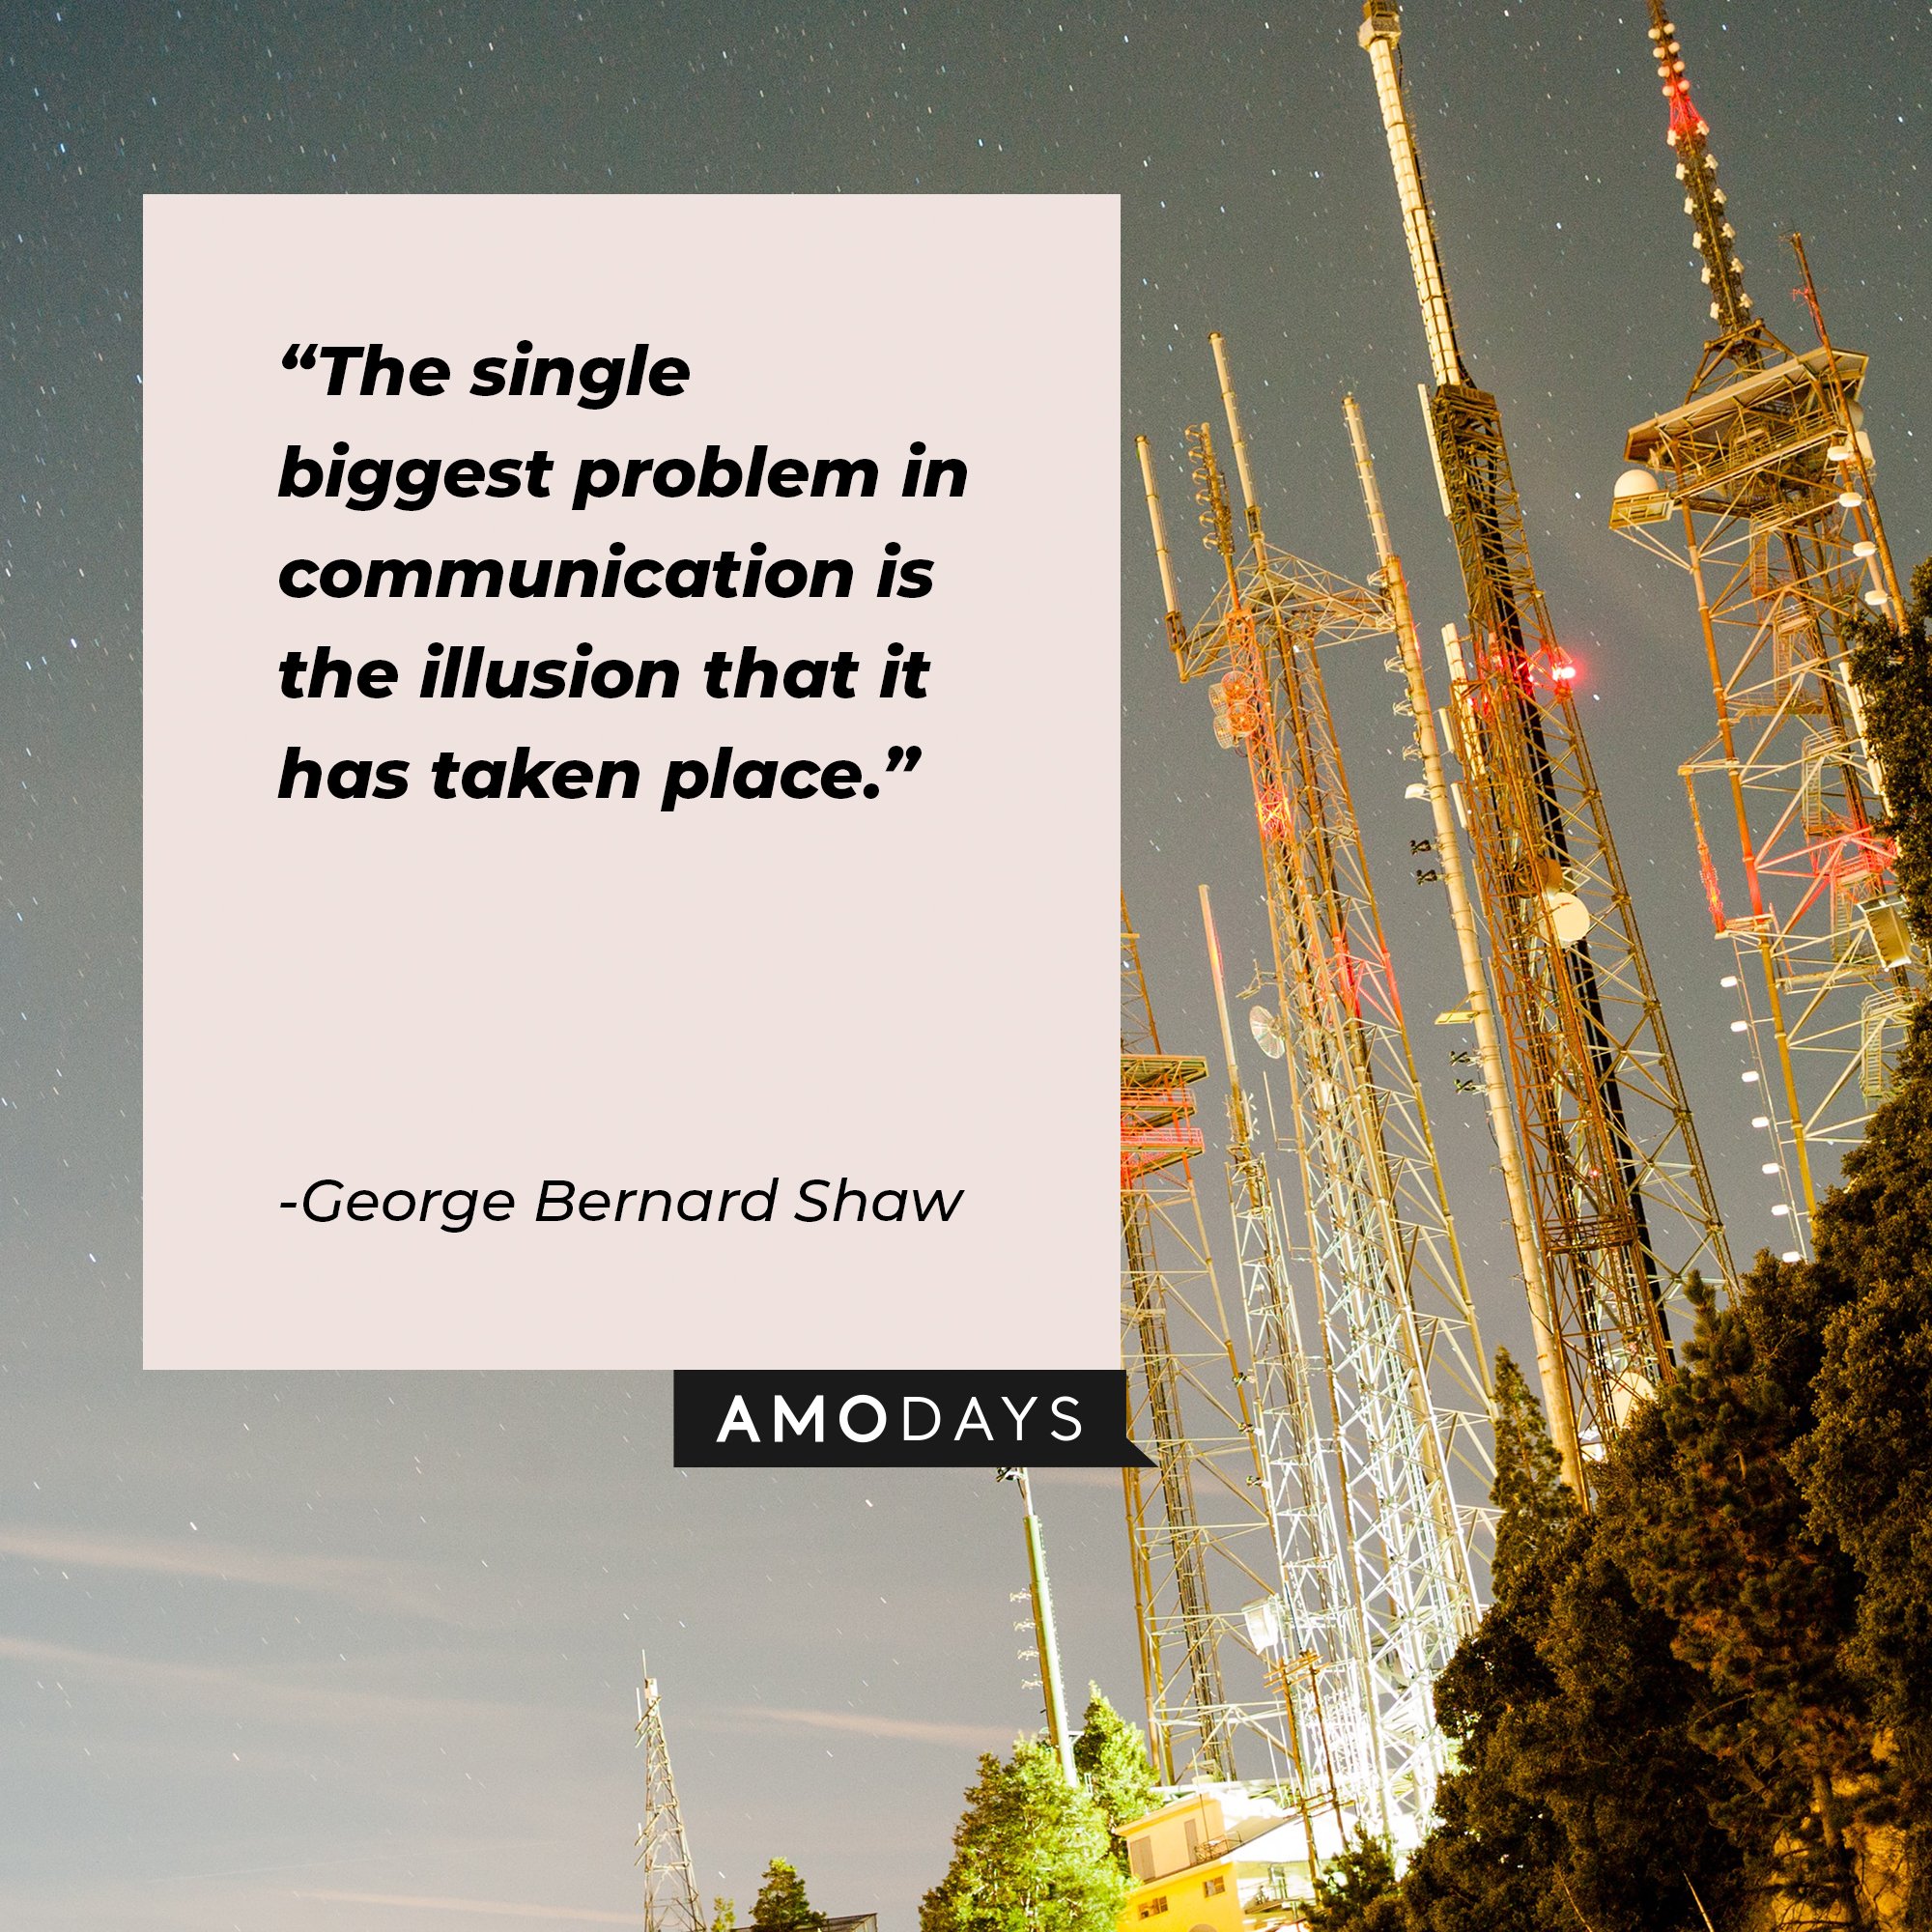 George Bernard Shaw's quote: “The single biggest problem in communication is the illusion that it has taken place.” | Image: AmoDays